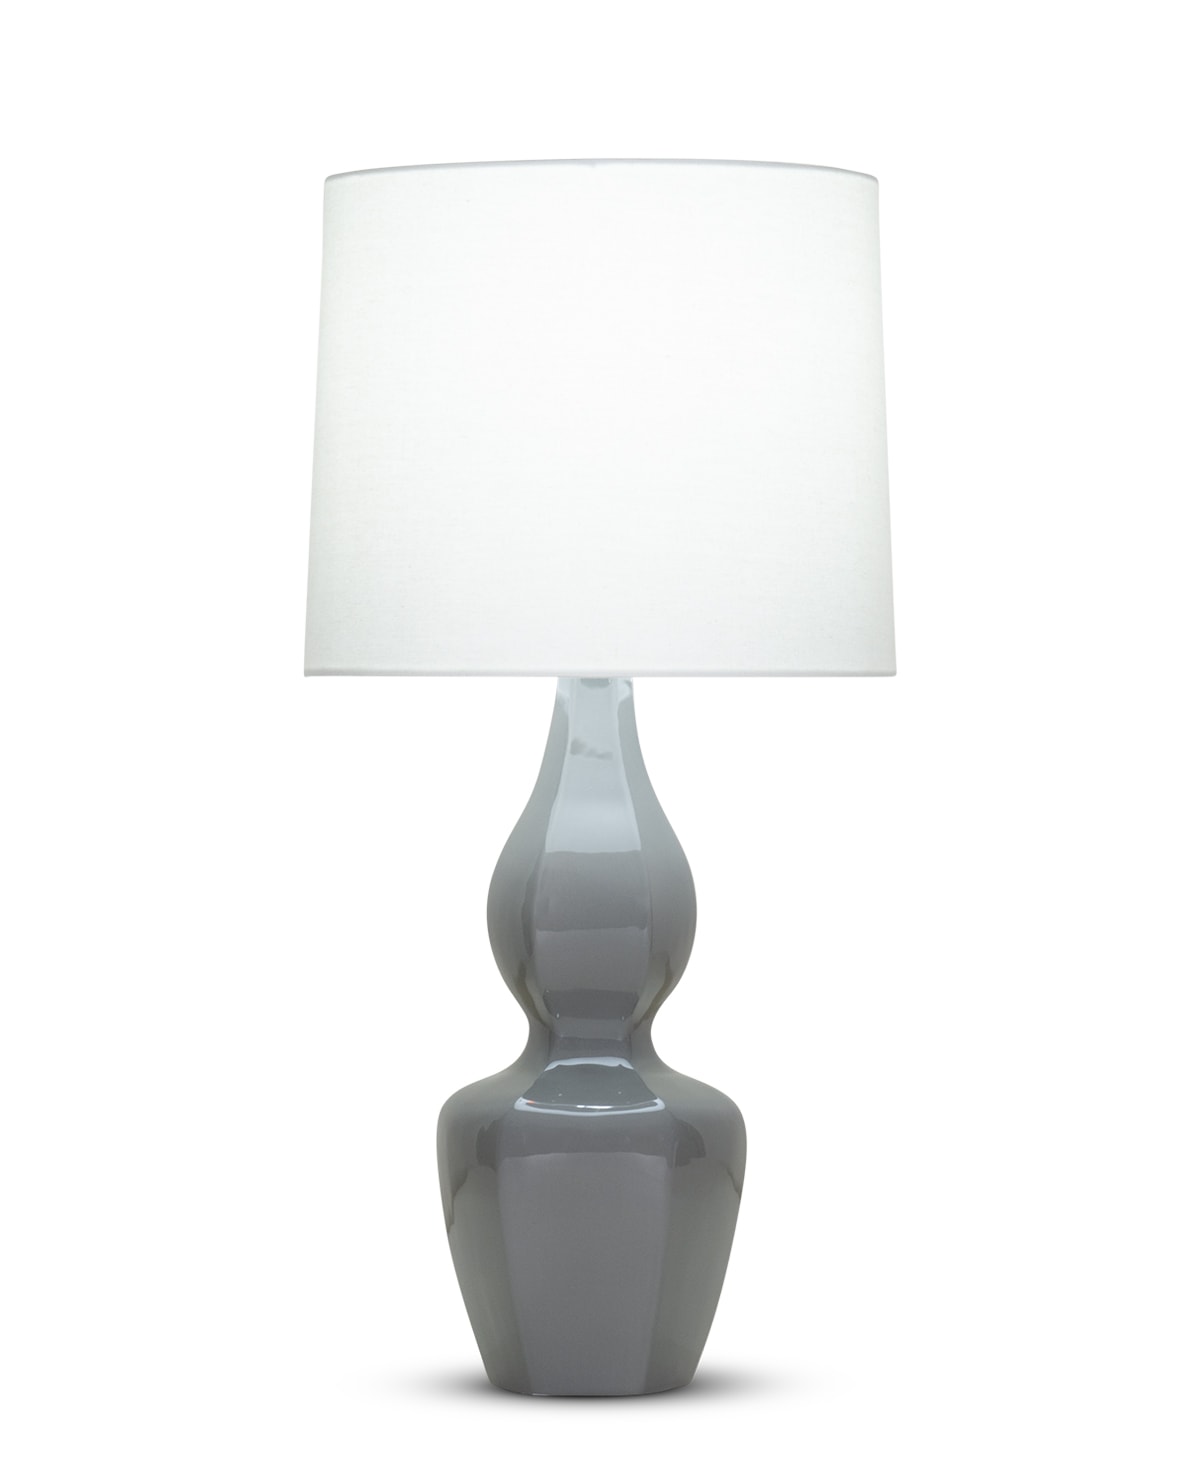 FlowDecor George Table Lamp in ceramic with charcoal grey finish and off-white linen tapered drum shade (# 4353)